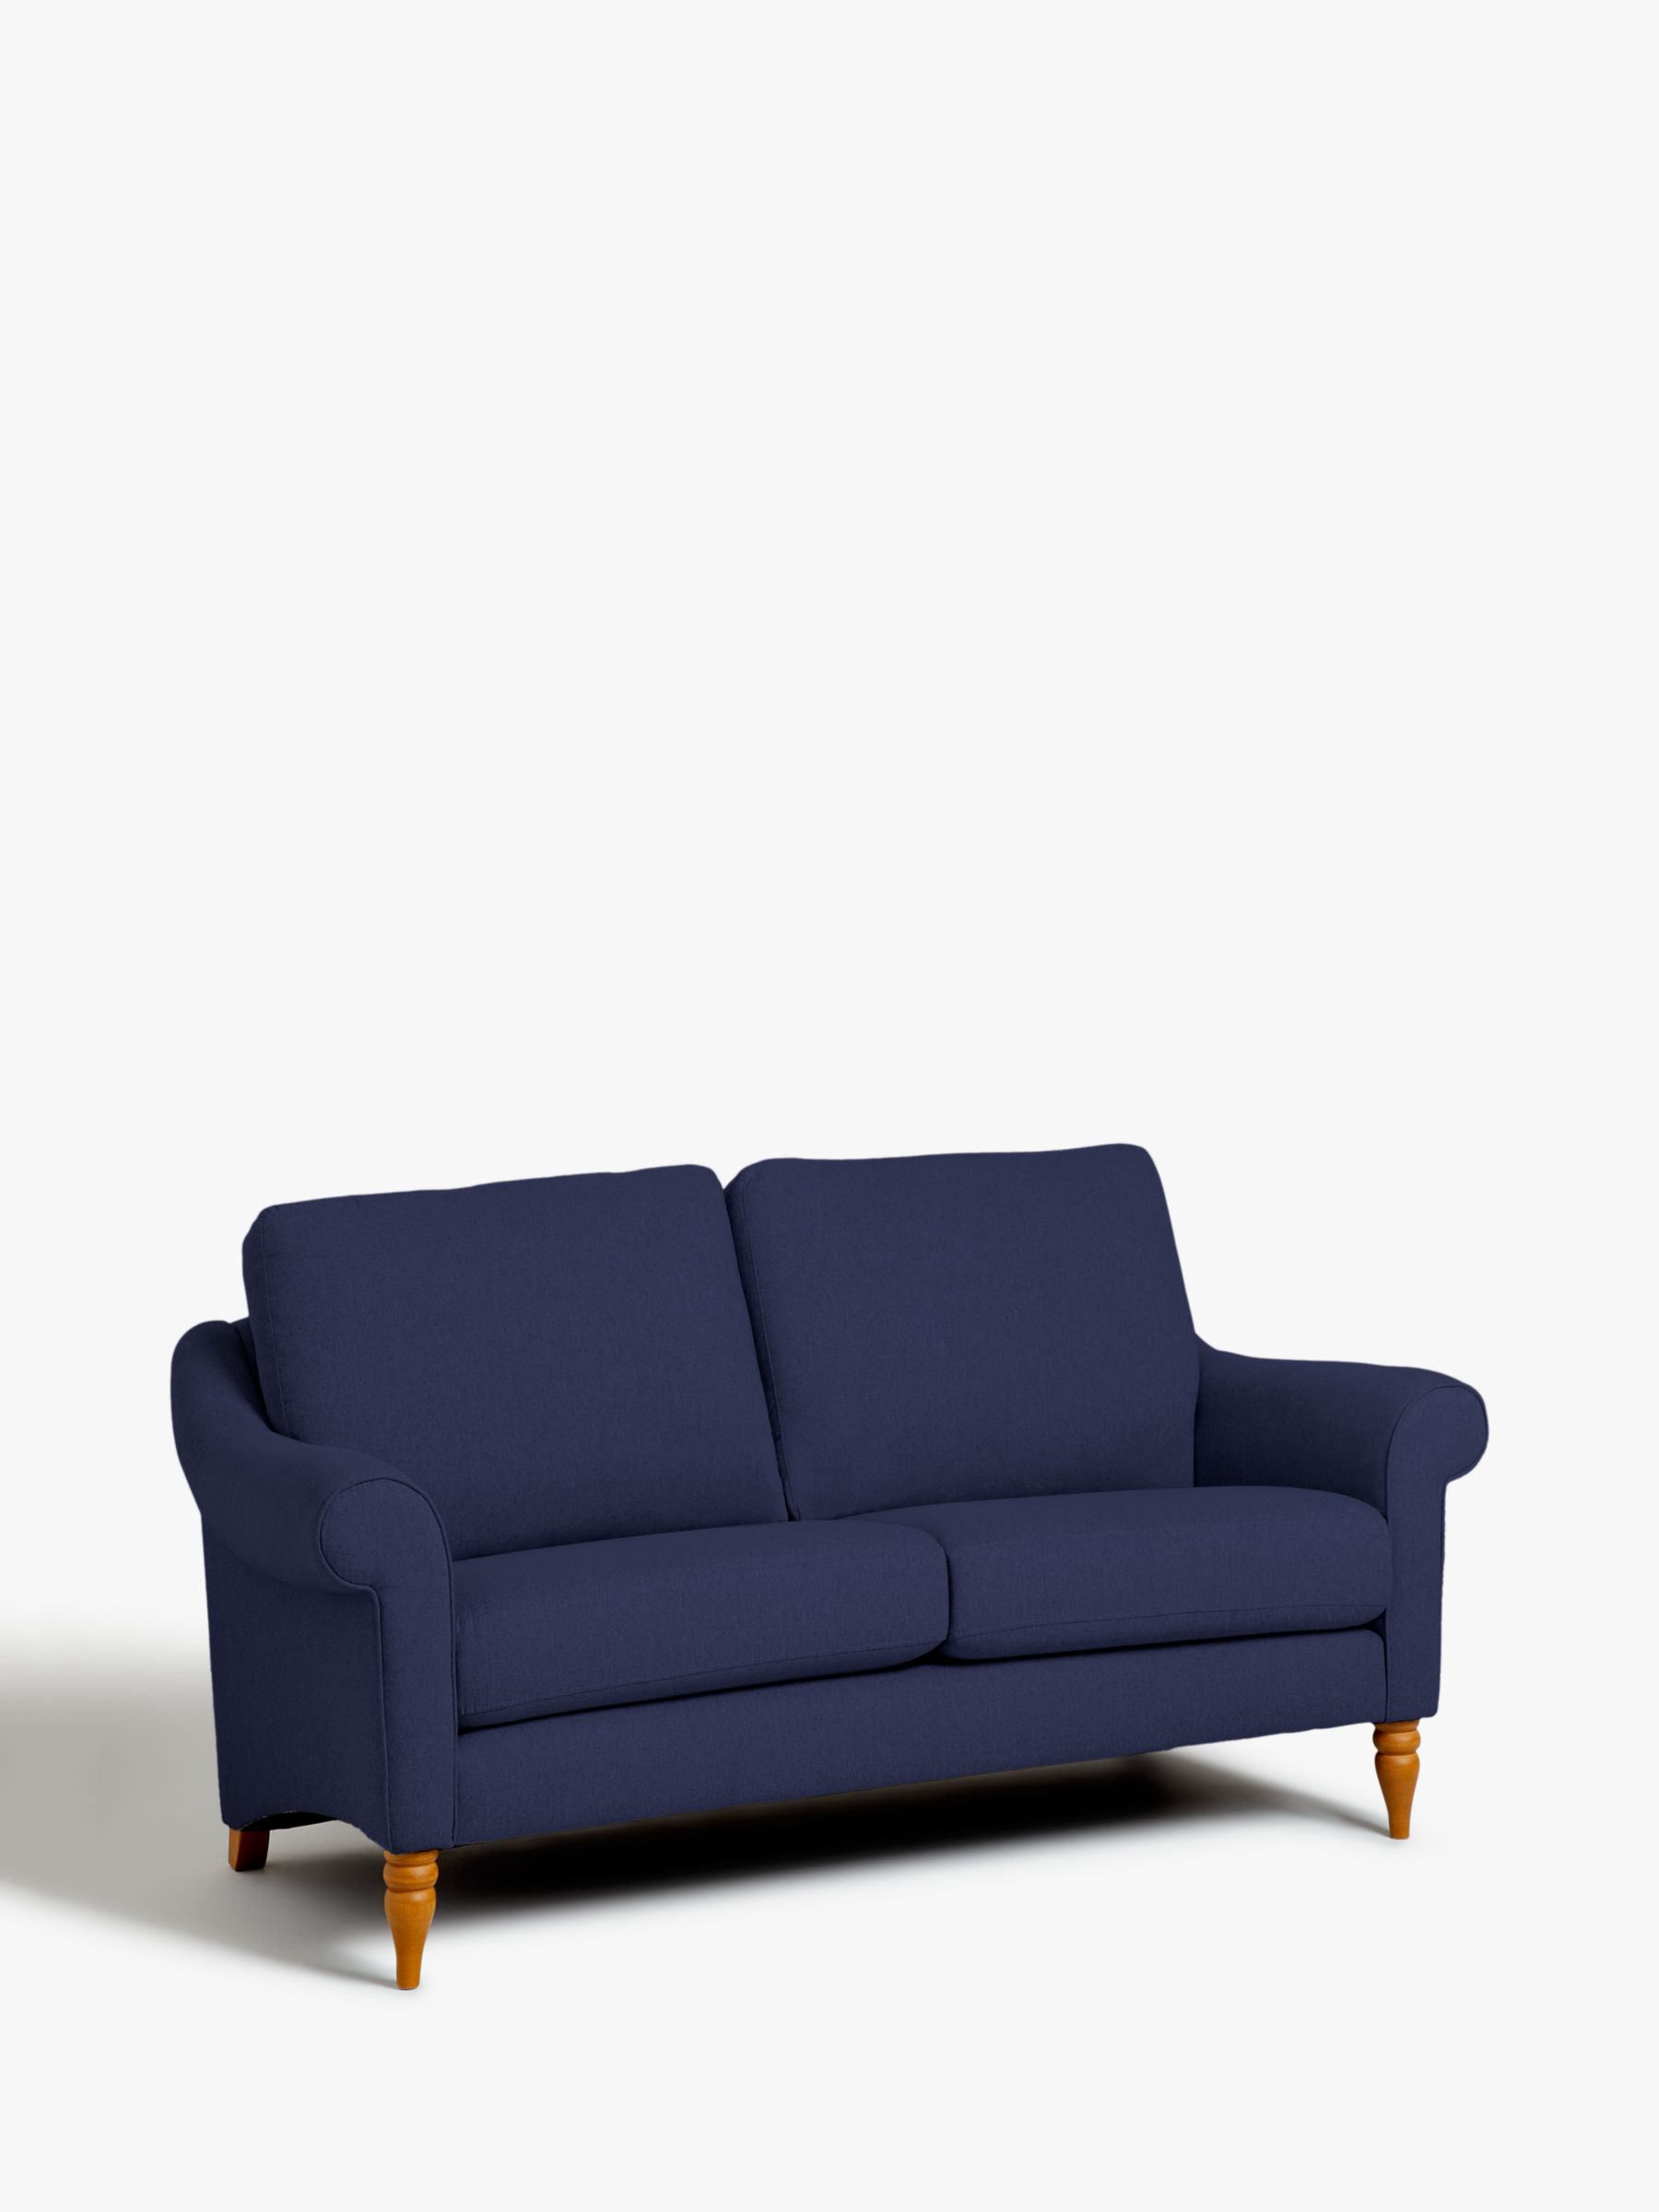 Camber Range, John Lewis Camber Small 2 Seater Sofa, Light Leg, Easy Clean Recycled Brushed Cotton Navy